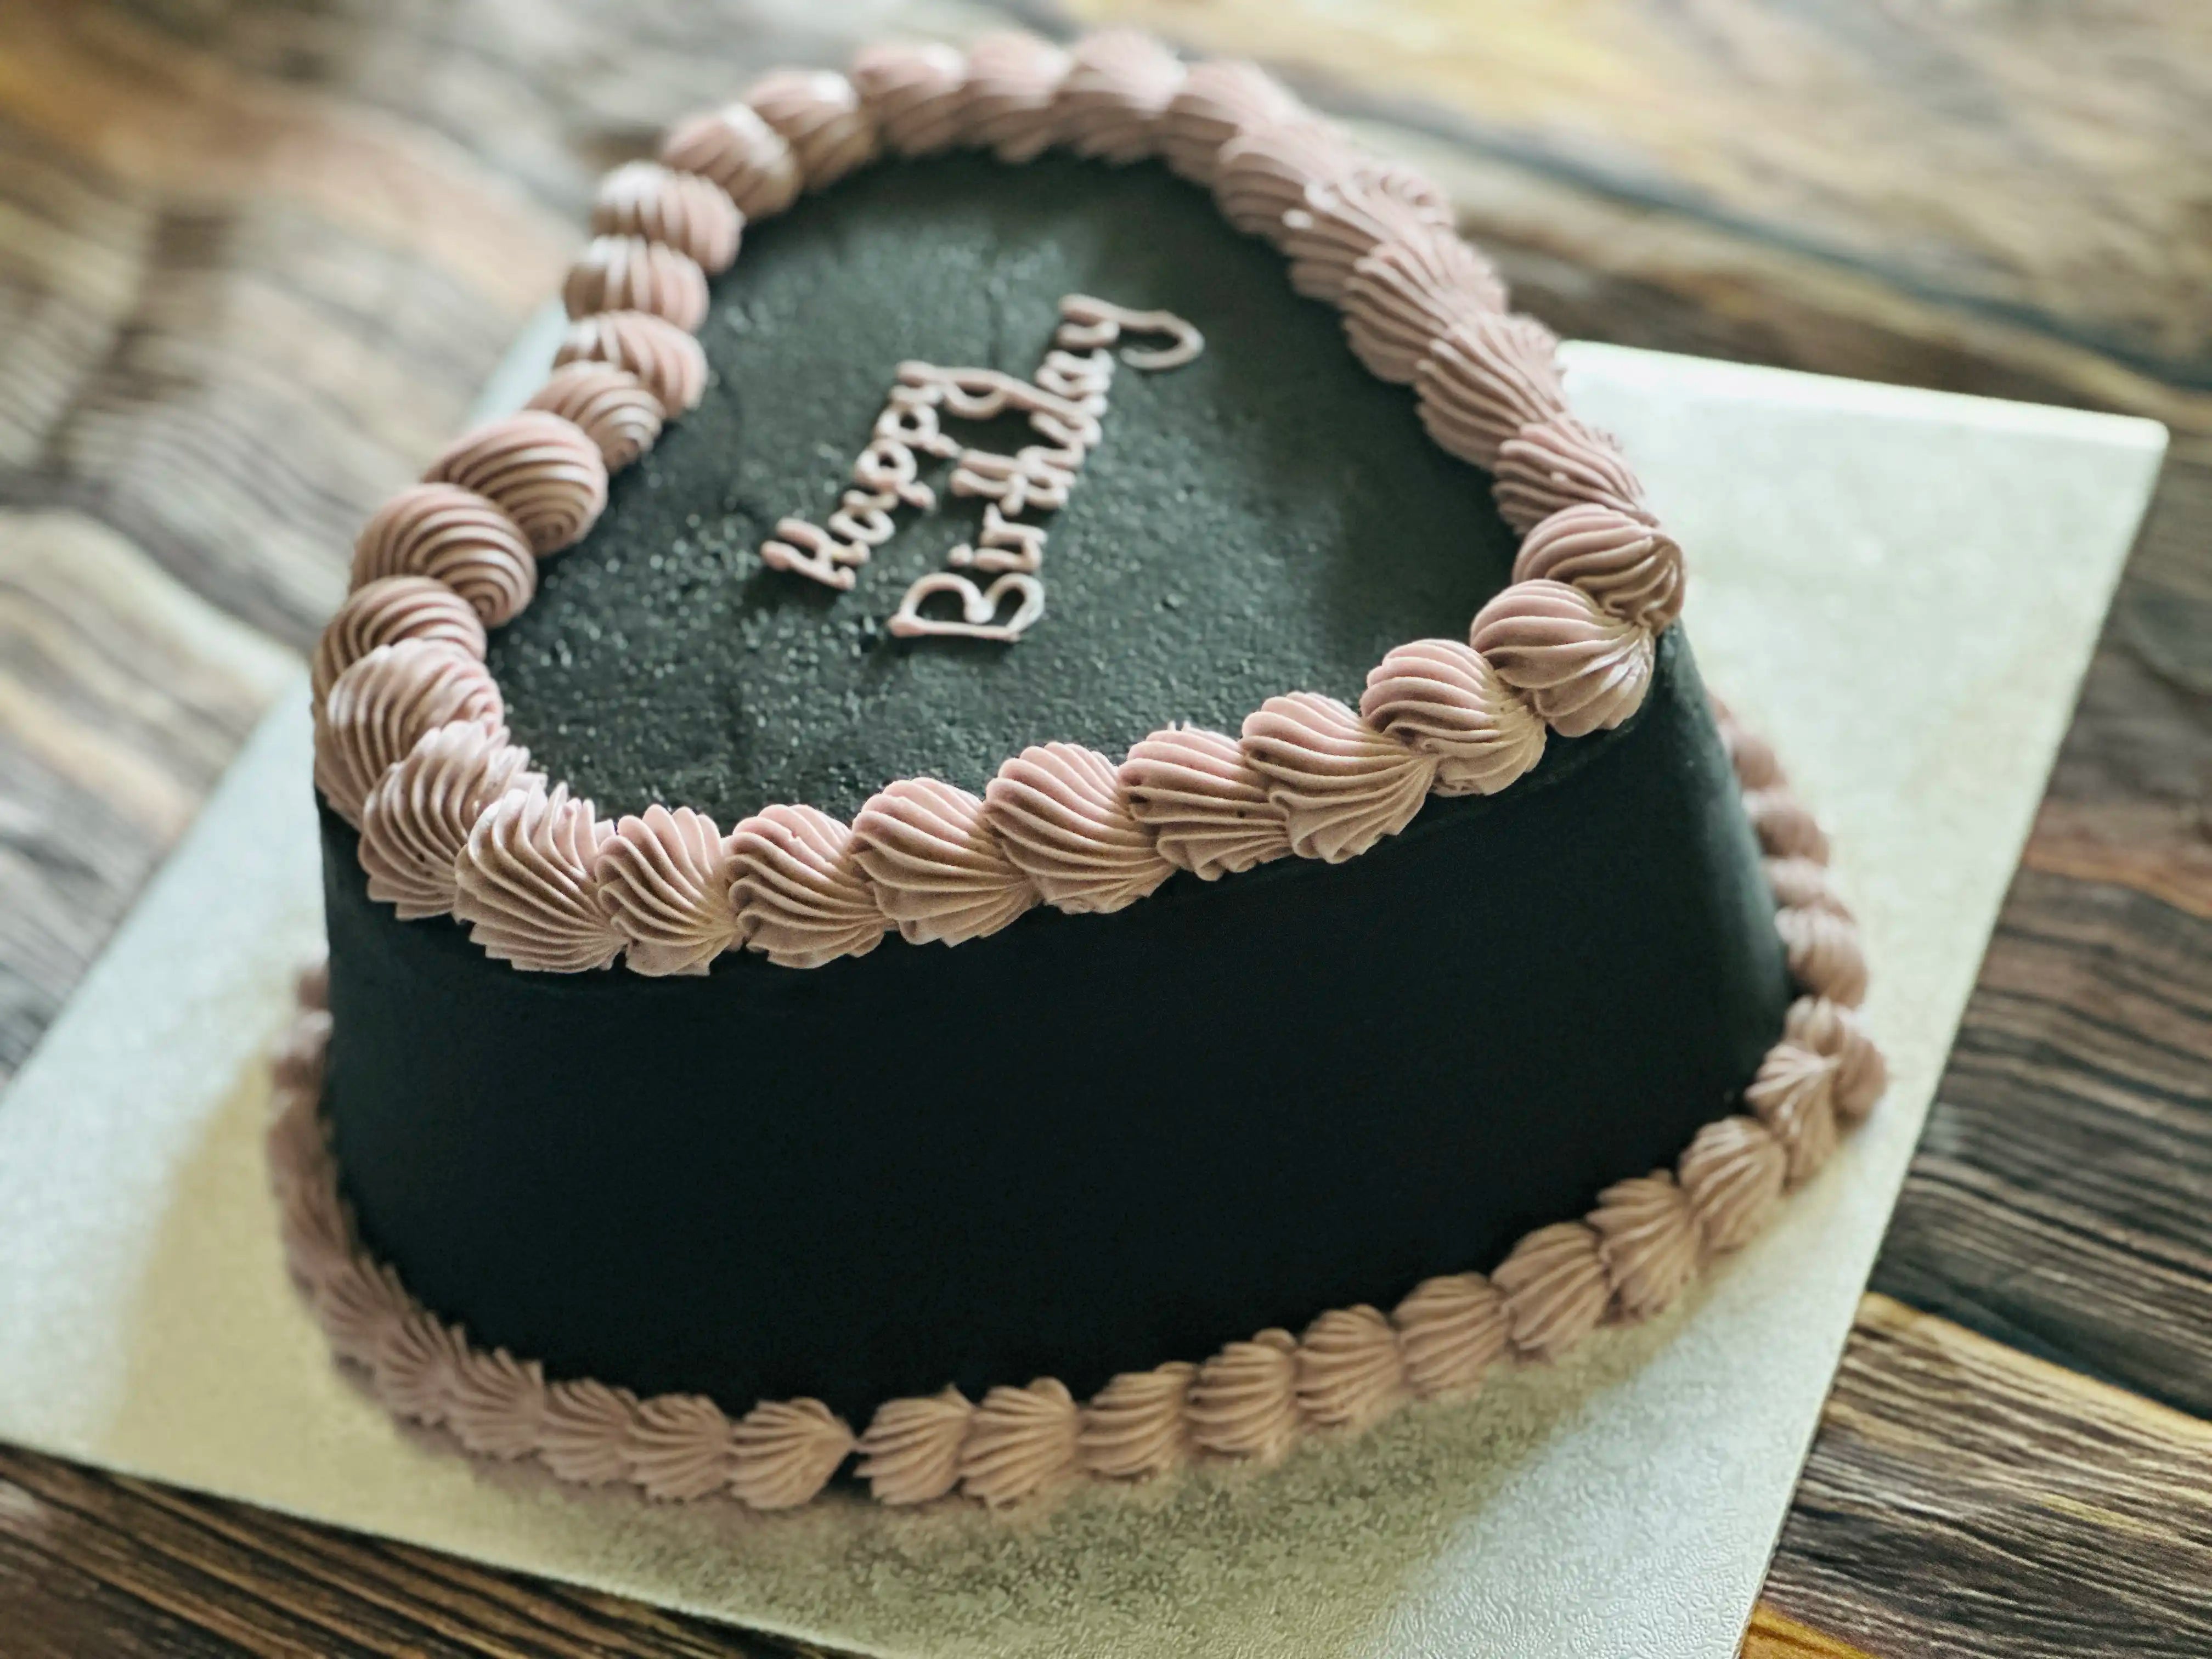 Online Cake Delivery in Philippines | Send Cakes to Philippines